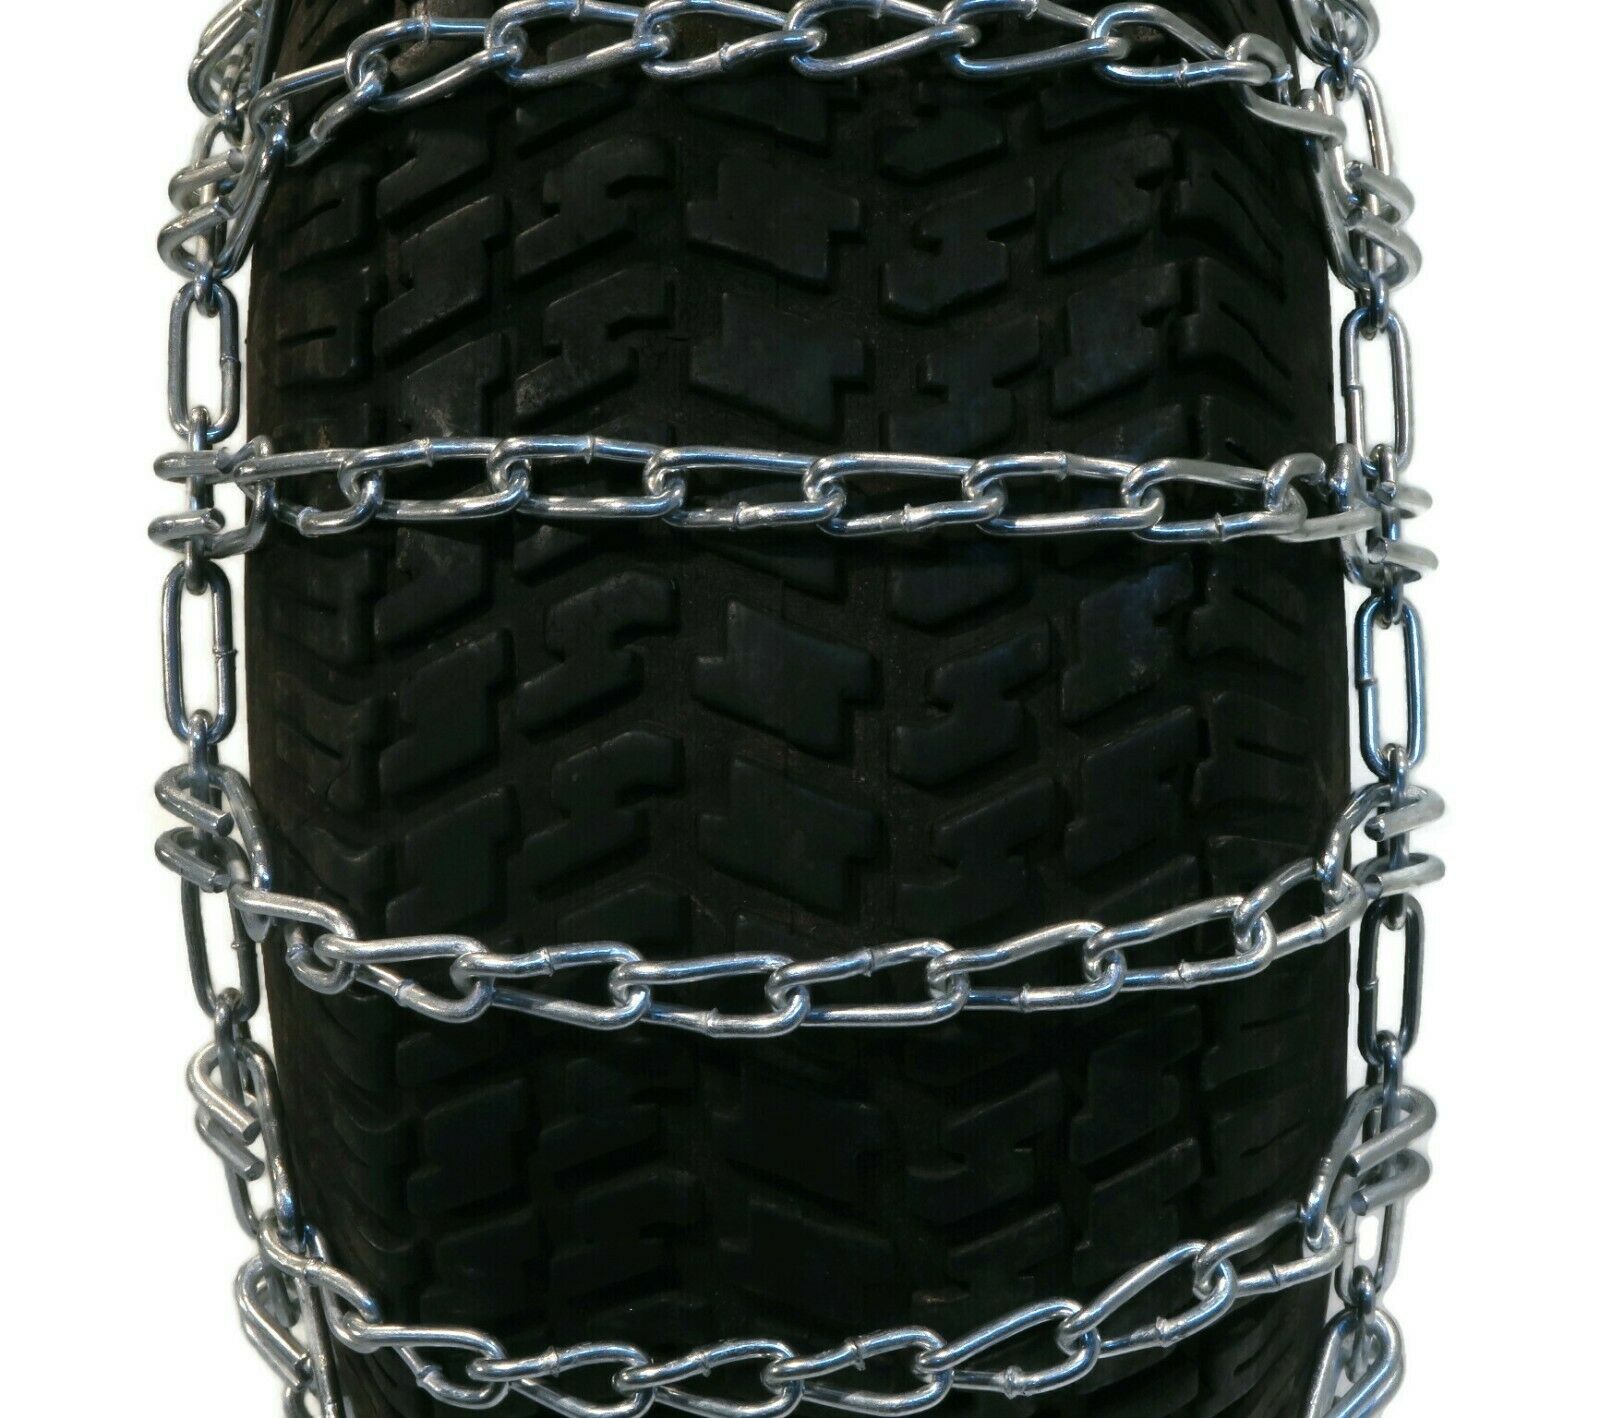 The ROP Shop | Pair of 2 Link Tire Chains 16x6.5x8 For Cub Cadet LawnMower, Snowblower, Thrower - image 5 of 6